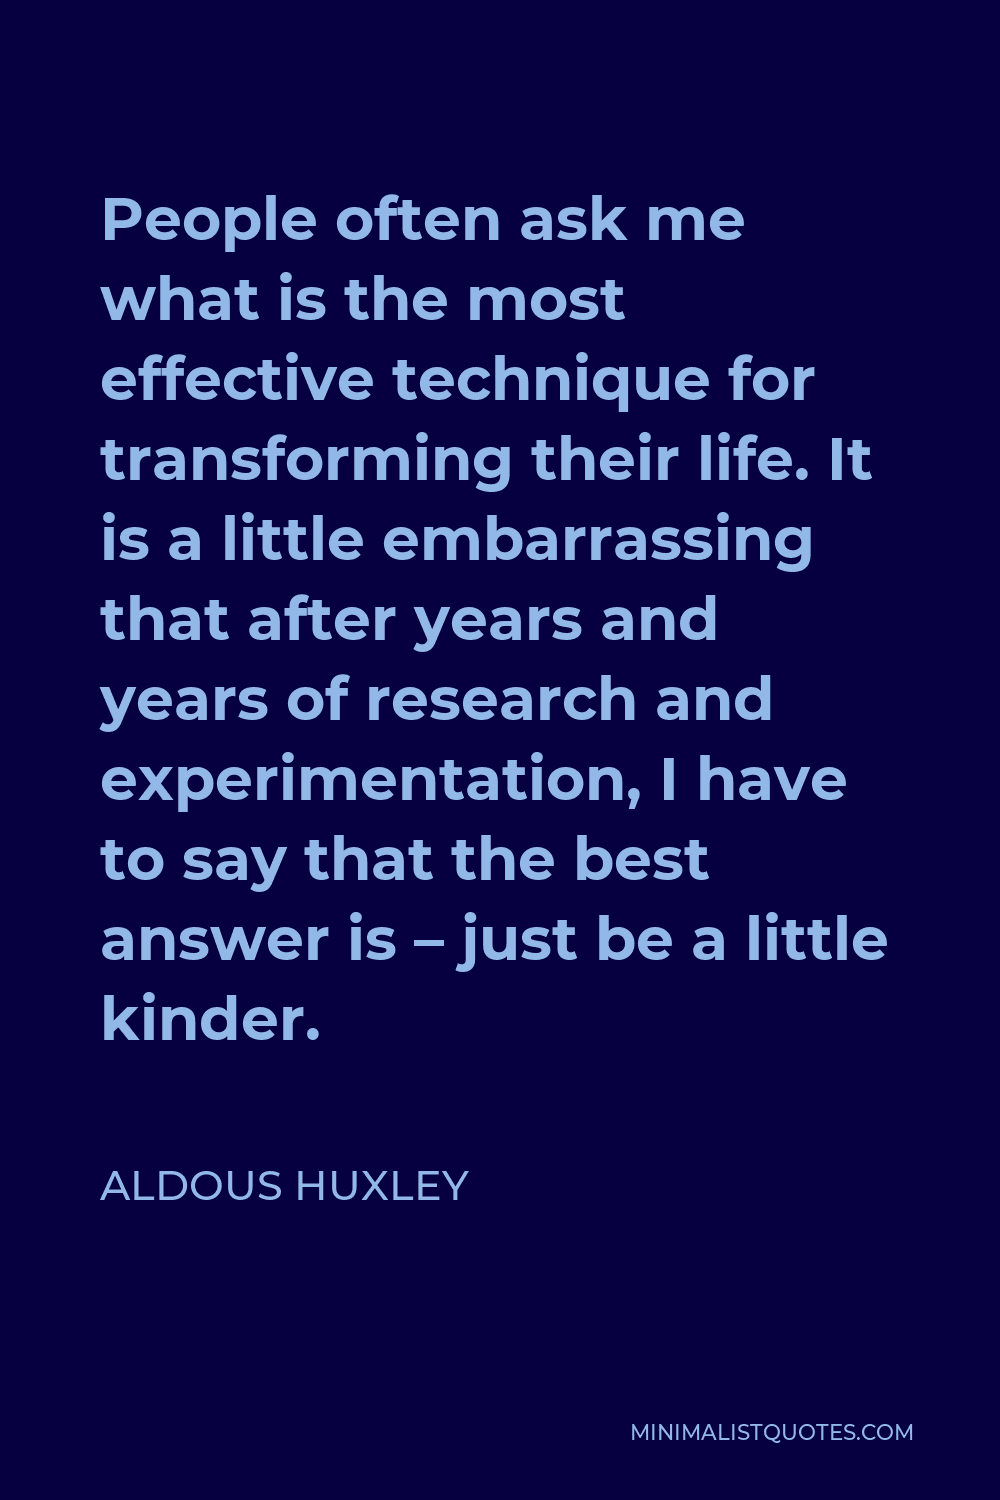 Aldous Huxley Quote - People often ask me what is the most effective technique for transforming their life. It is a little embarrassing that after years and years of research and experimentation, I have to say that the best answer is – just be a little kinder.